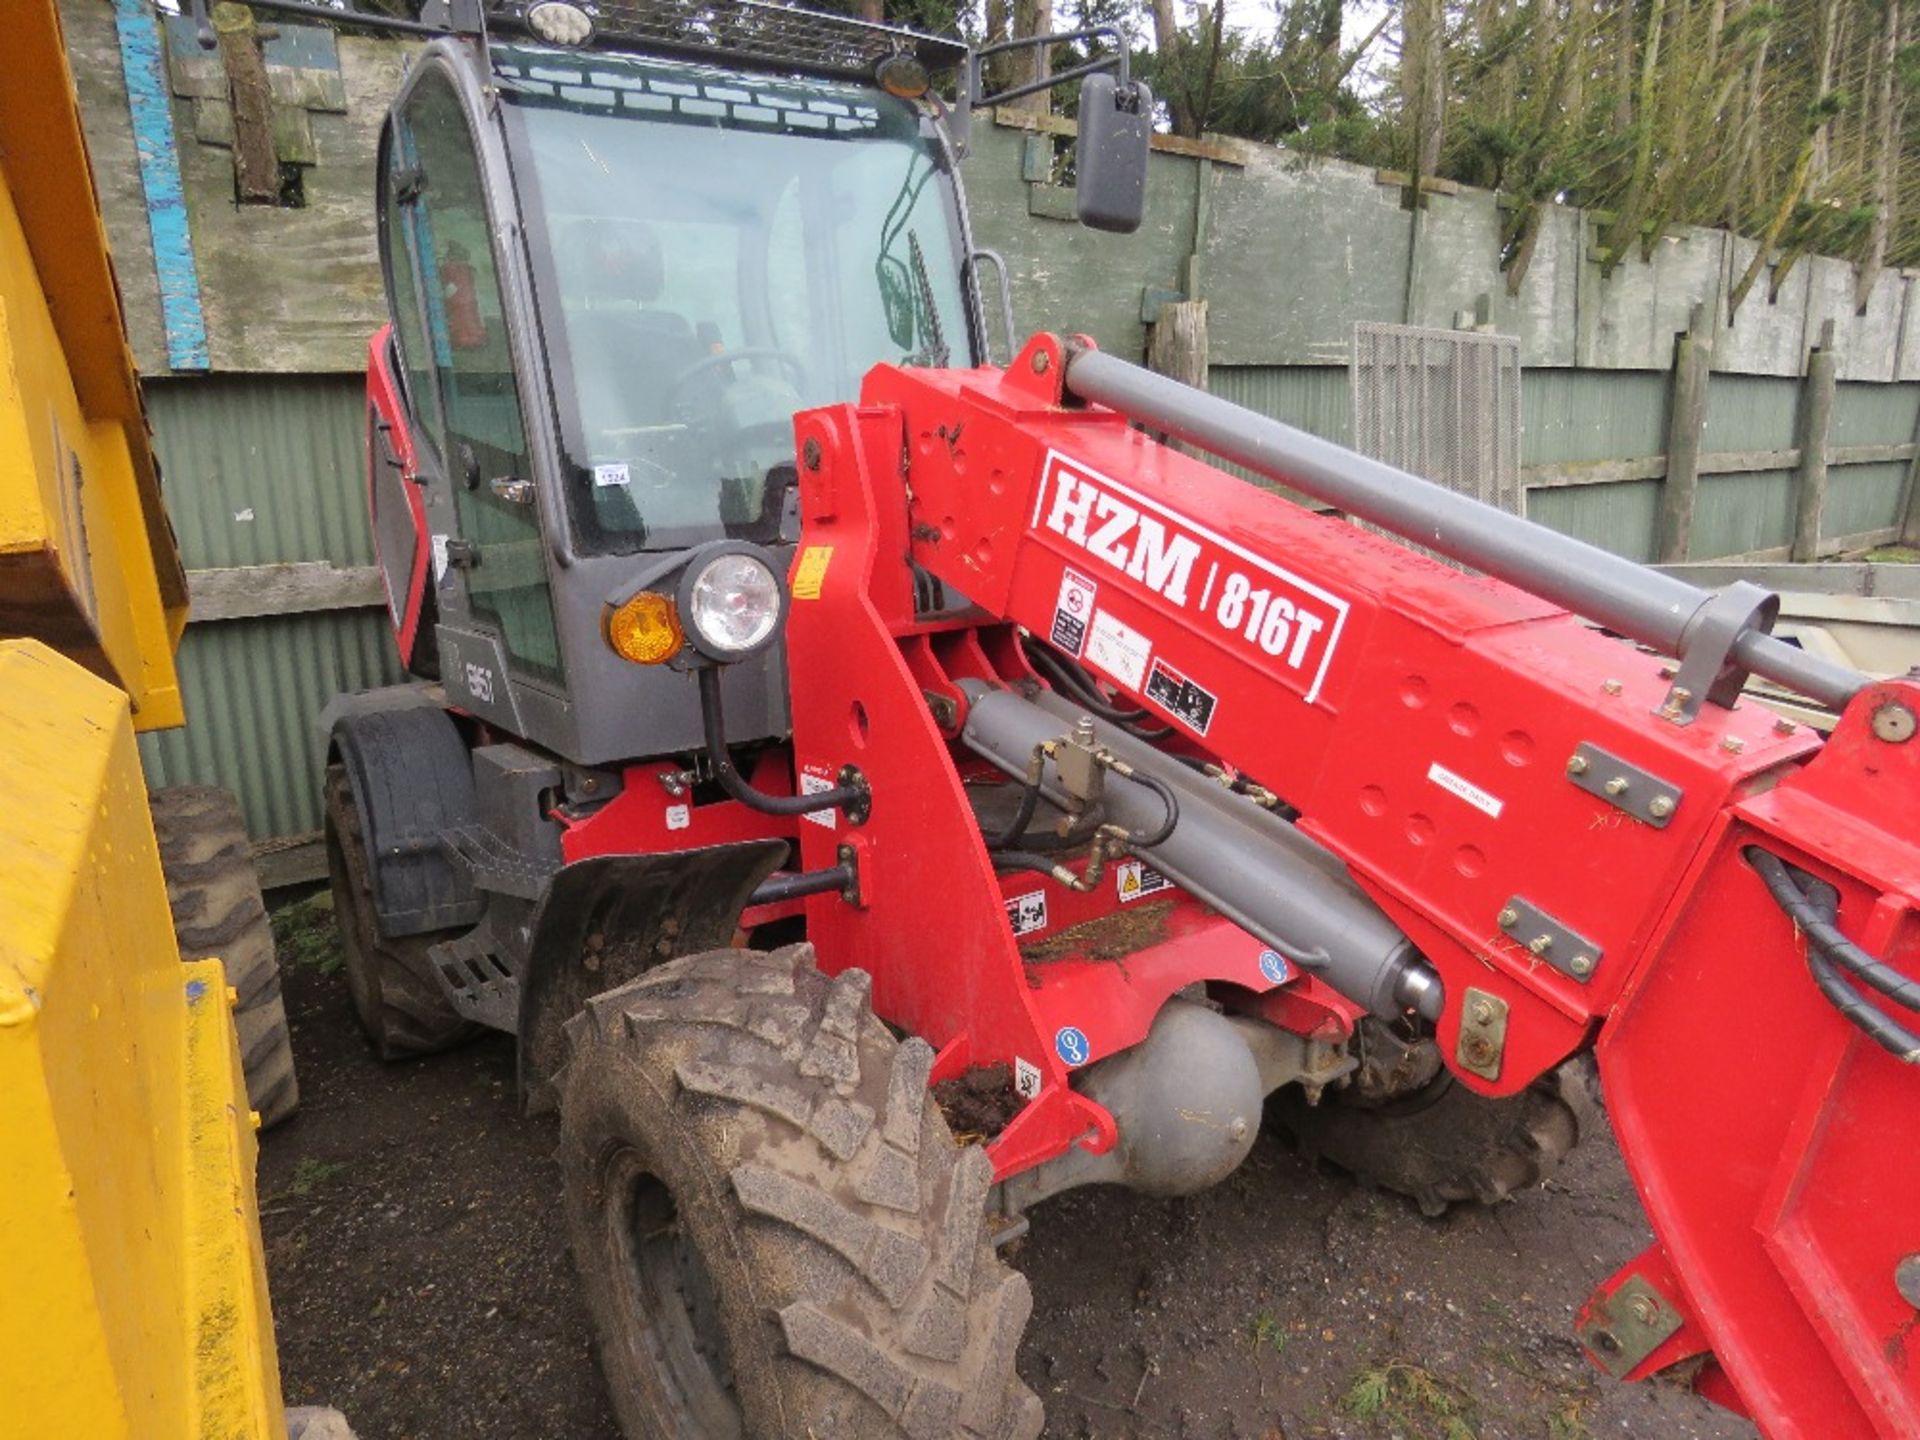 HZM 816T TELESCOPIC CENTRE PIVOT STEERING MATERIAL HANDLER YEAR 2021. 141 REC HOURS WITH BUCKET AND - Bild 2 aus 19